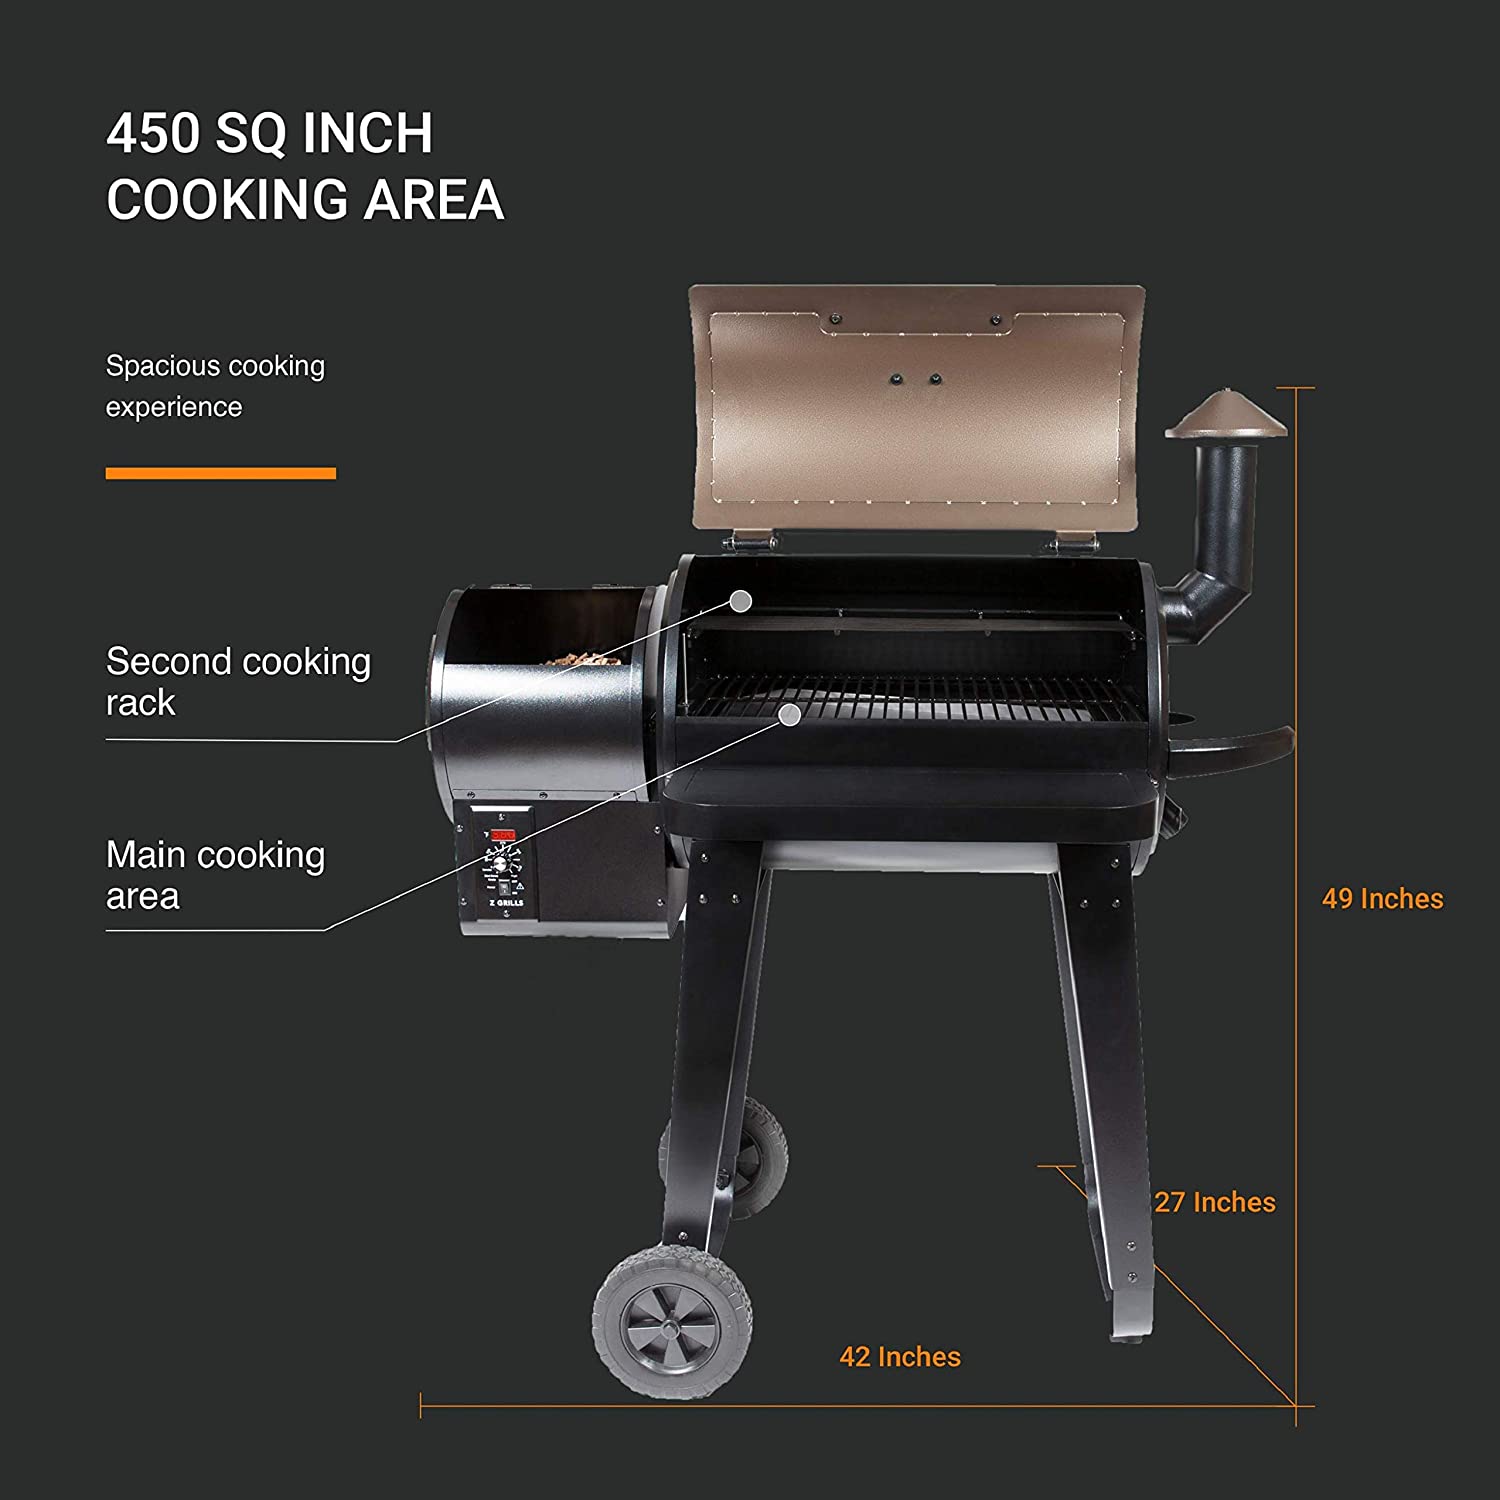 Z GRILLS 450A Smart Wood Pellet Fired Grill 6 in 1 Outdoor BBQ Smoker 450 SQ inches Cooking Space Barbecue Grilling Bronze - image 3 of 10